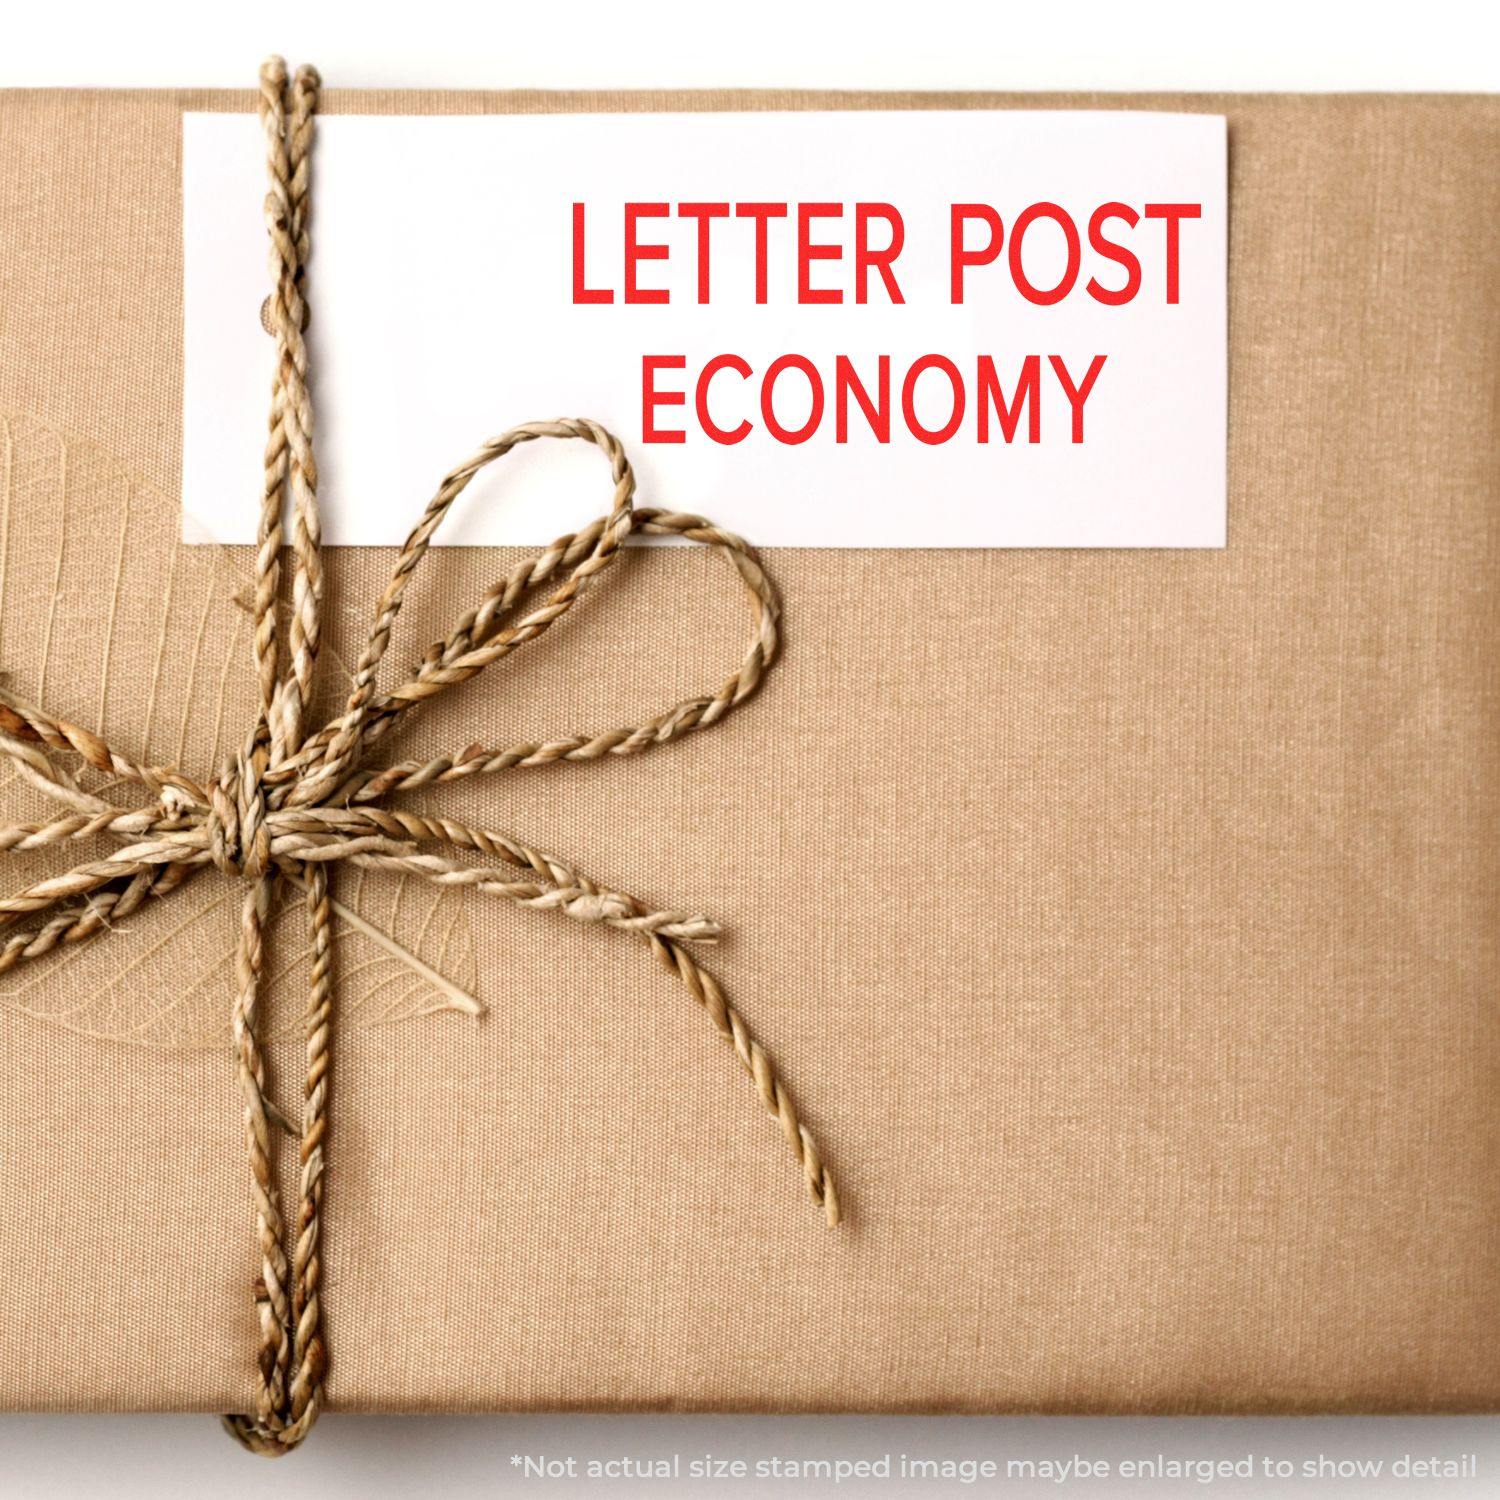 A stock office rubber stamp with a stamped image showing how the text "LETTER POST ECONOMY" in a large font is displayed after stamping.